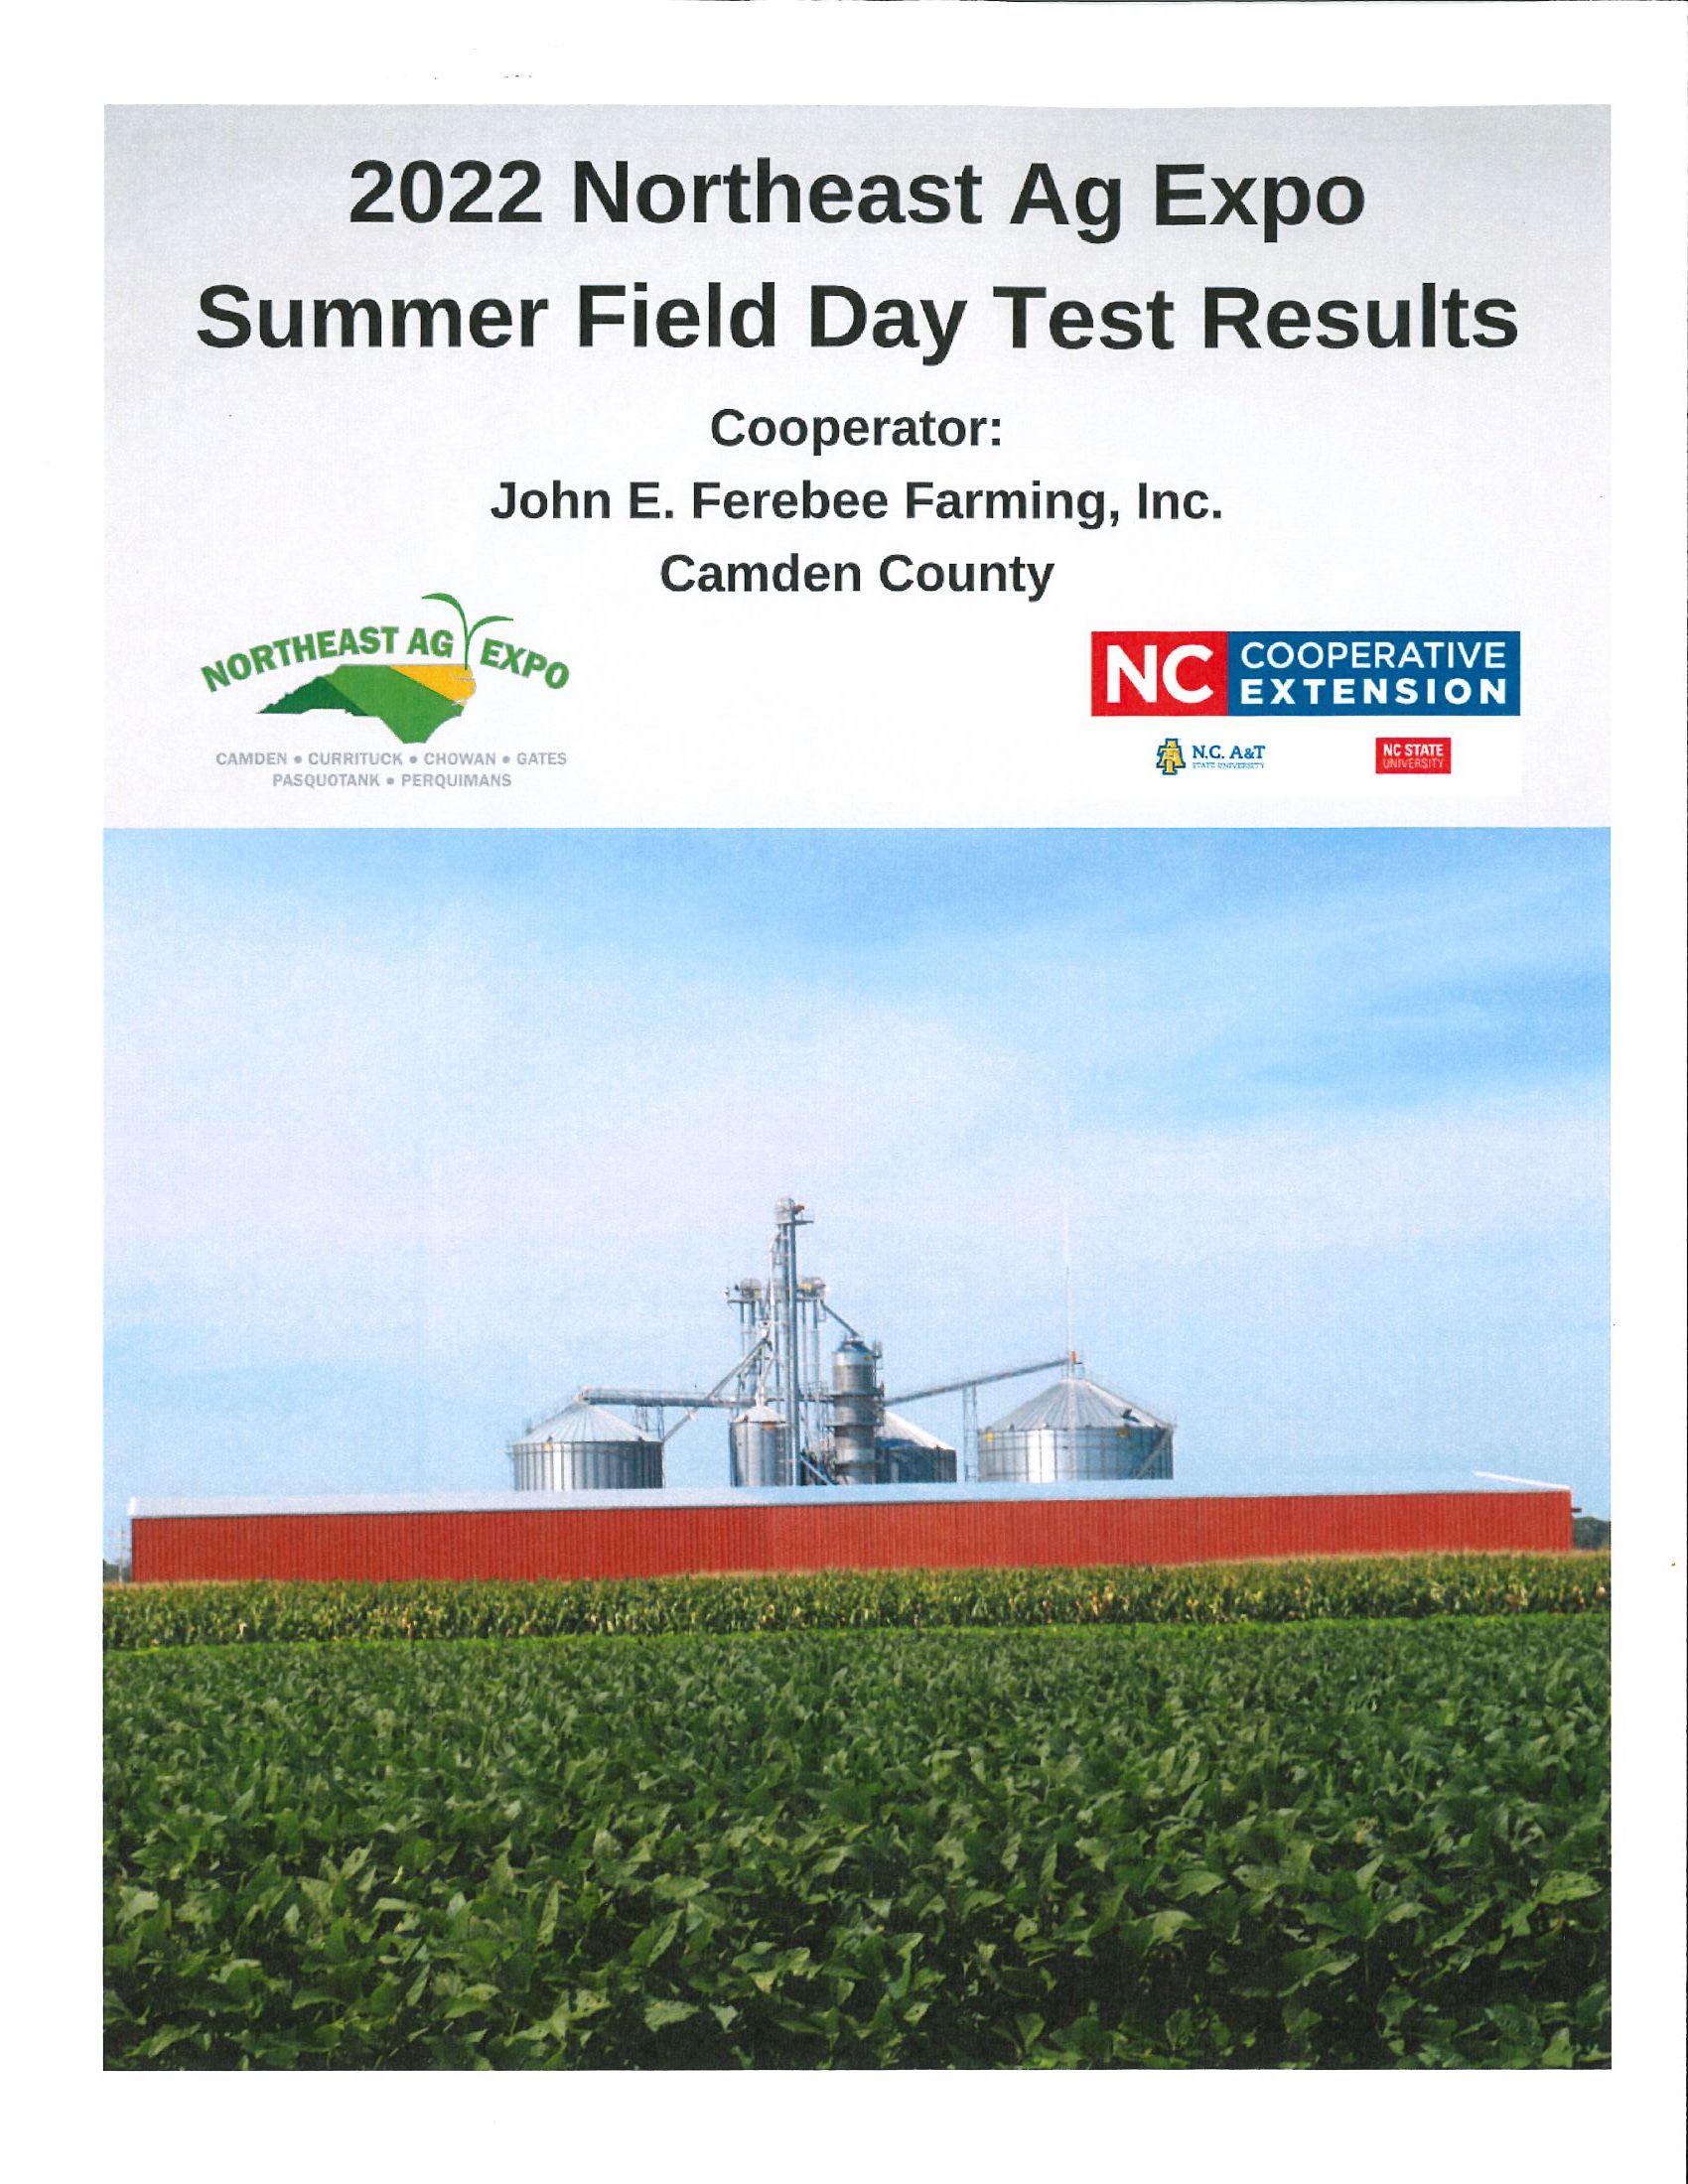 2022 Northeast Ag Expo Summer Field Day Test Results